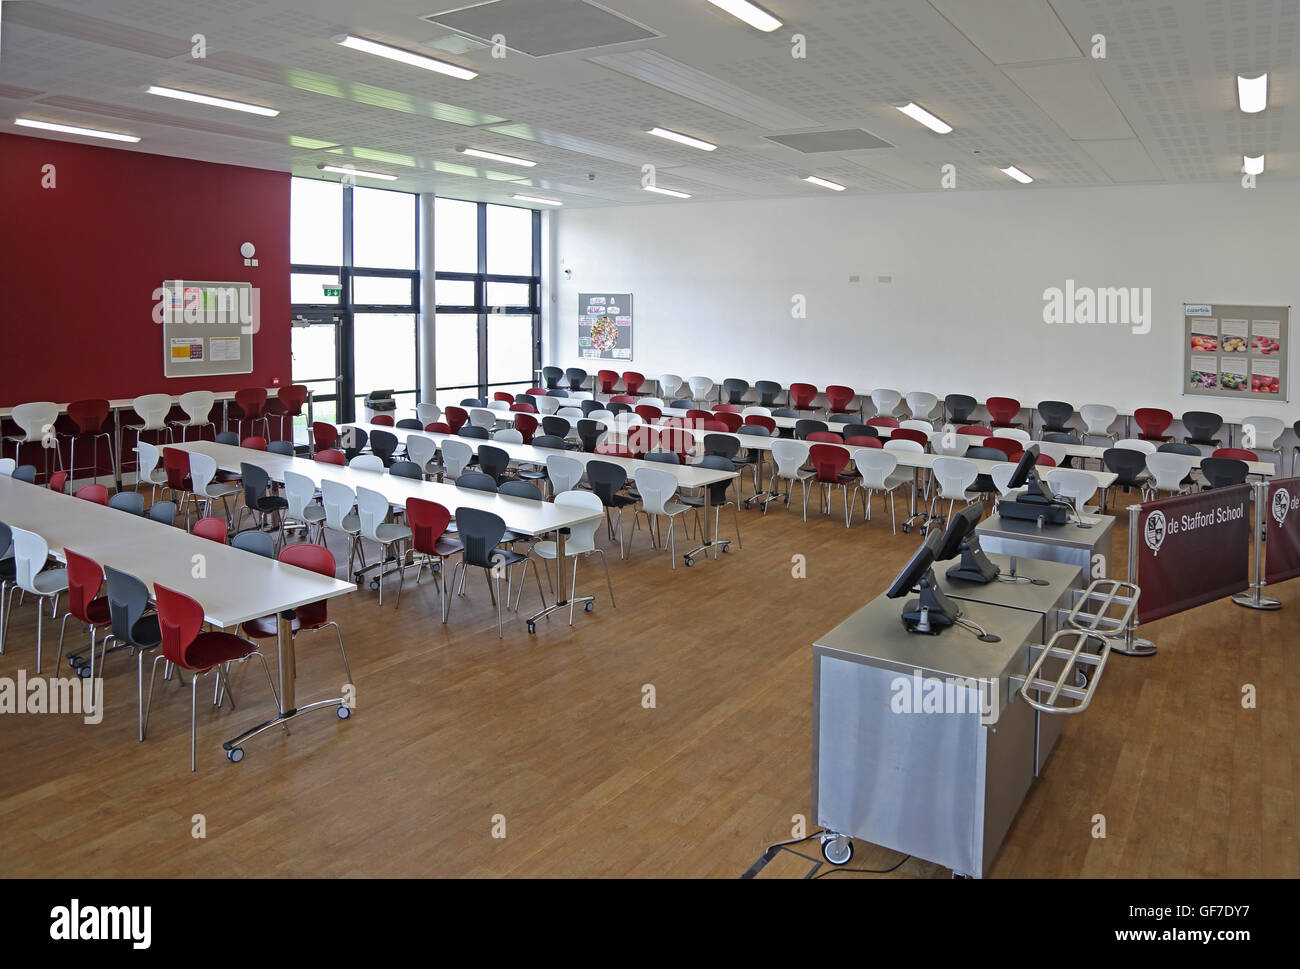 Interior view of a new school dining hall. Shows tables and chairs, serving area, no people. Stock Photo